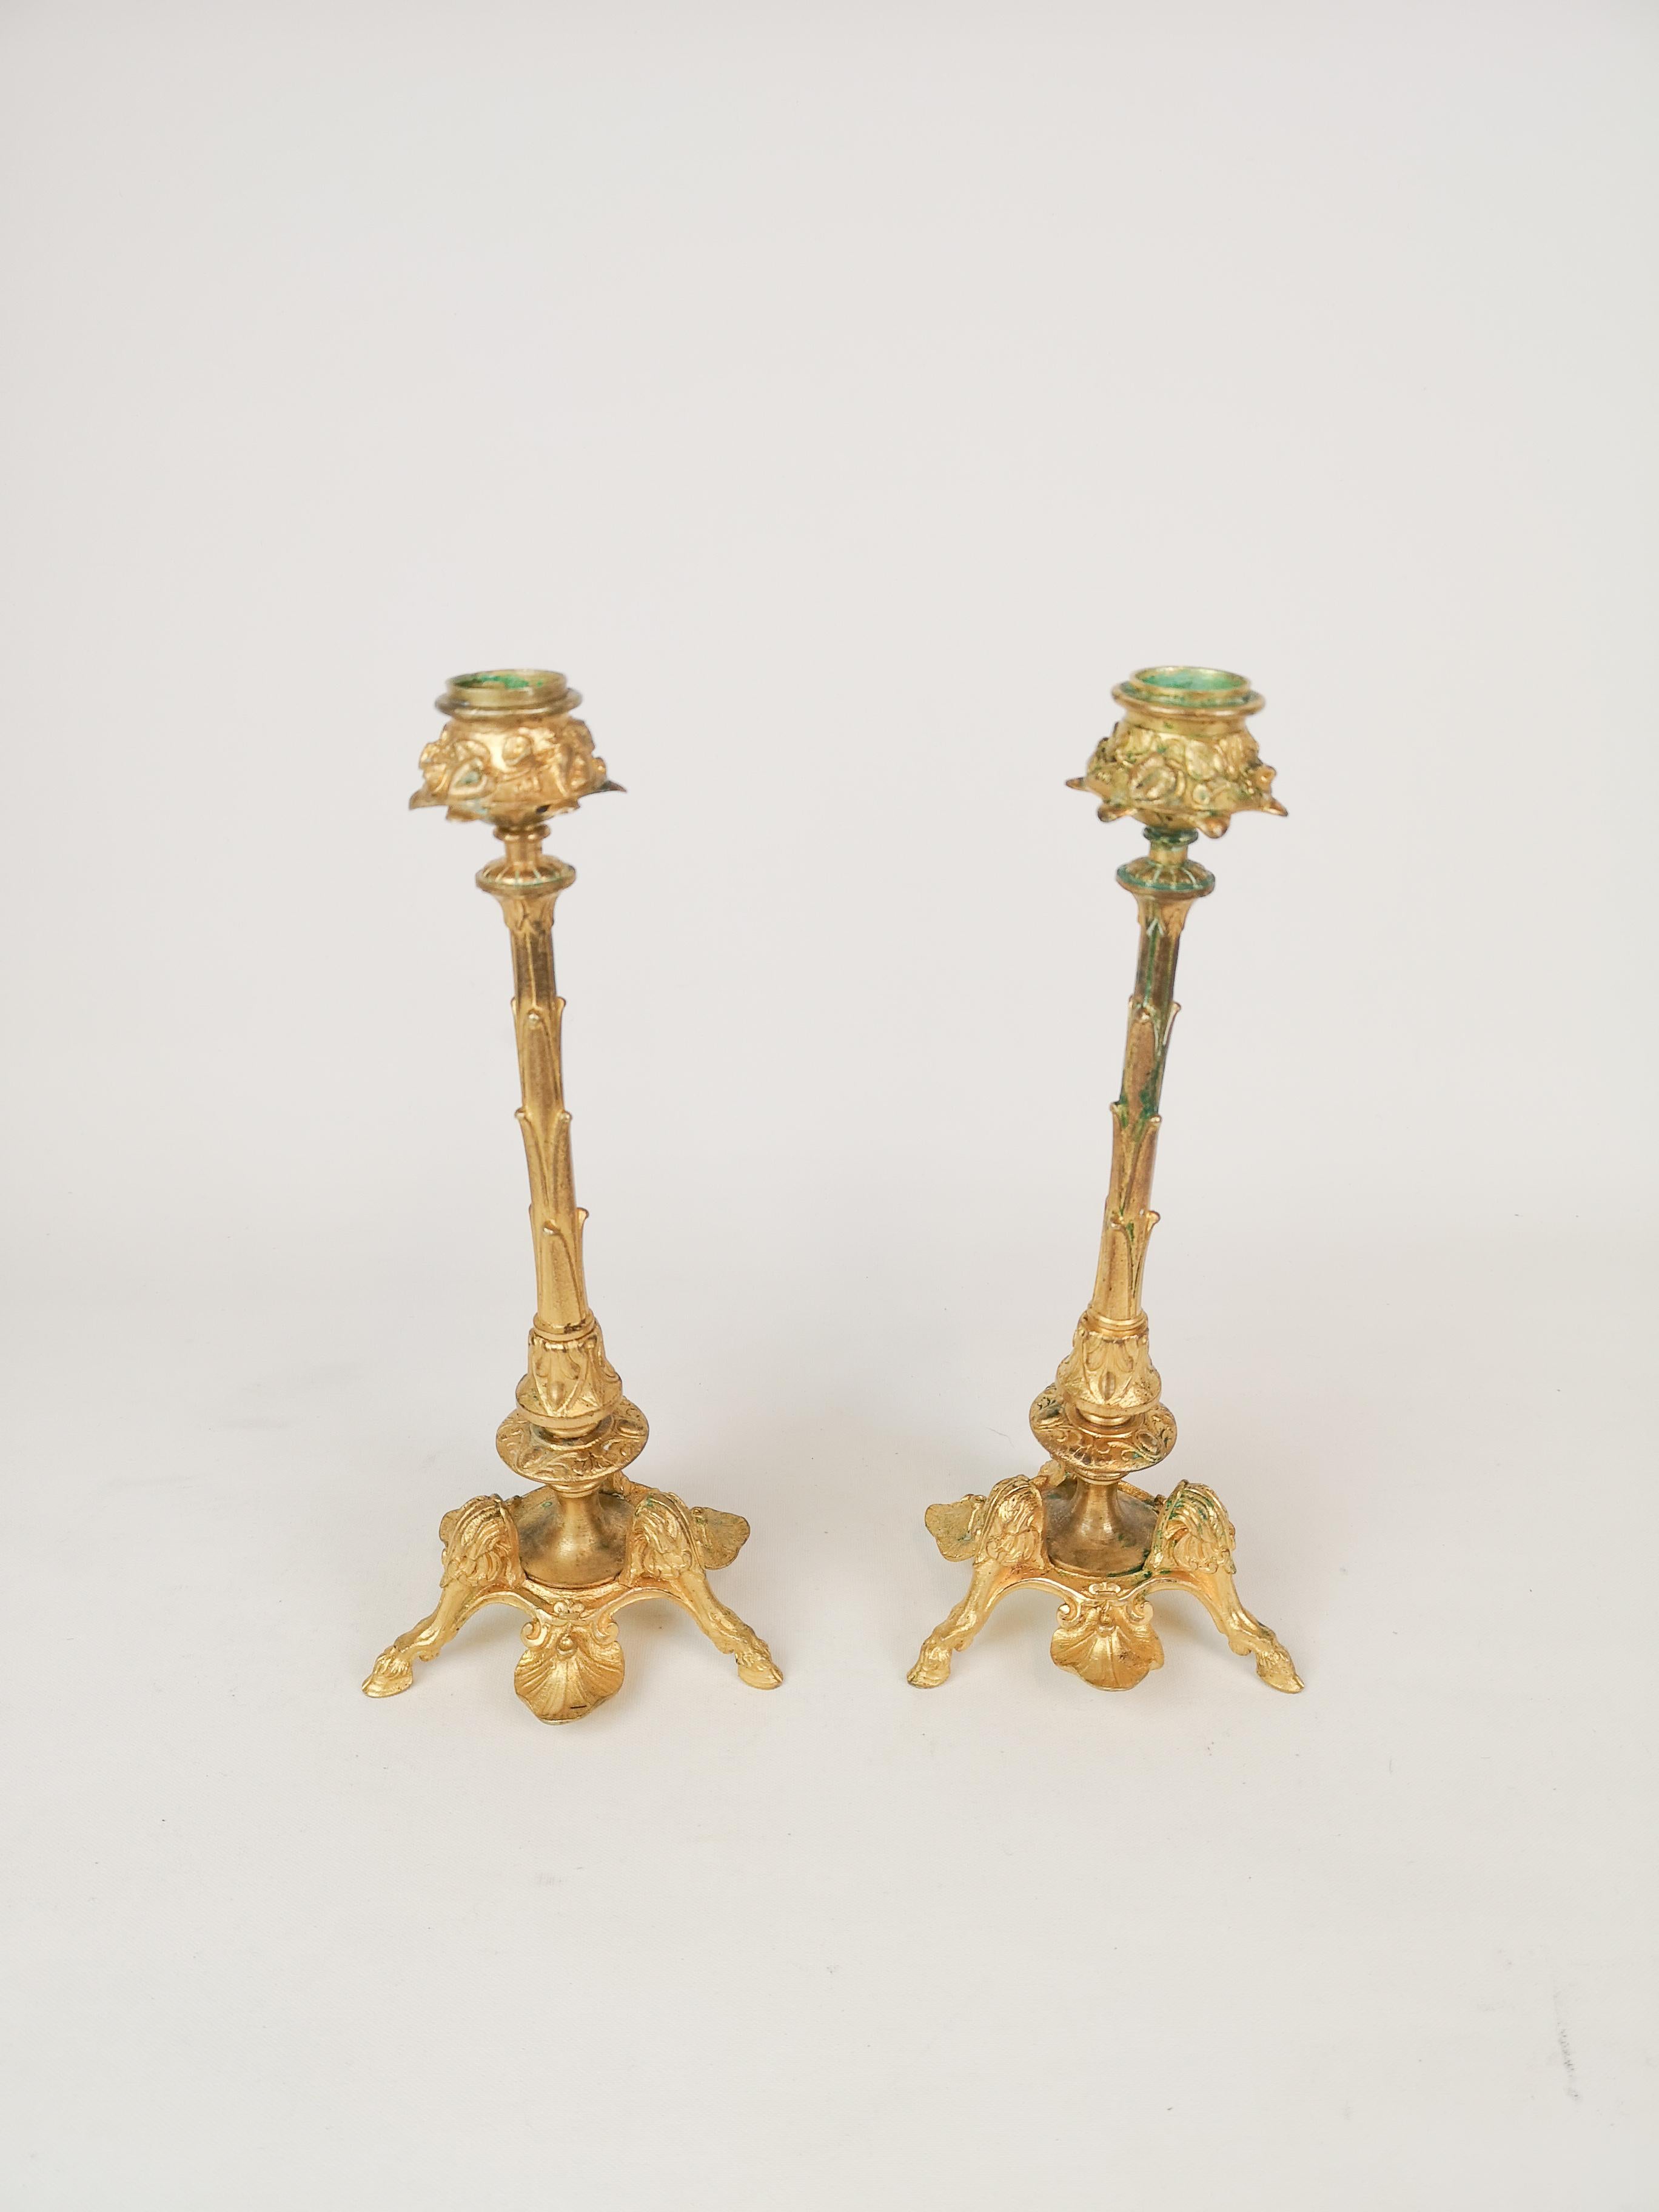 This pair of candle sticks in gilt bronze are from the 1900 century most certain made in Sweden 1870-1880.

Good fair condition with some signs of use. 

Measures: H 26 cm, D 13 cm.
 